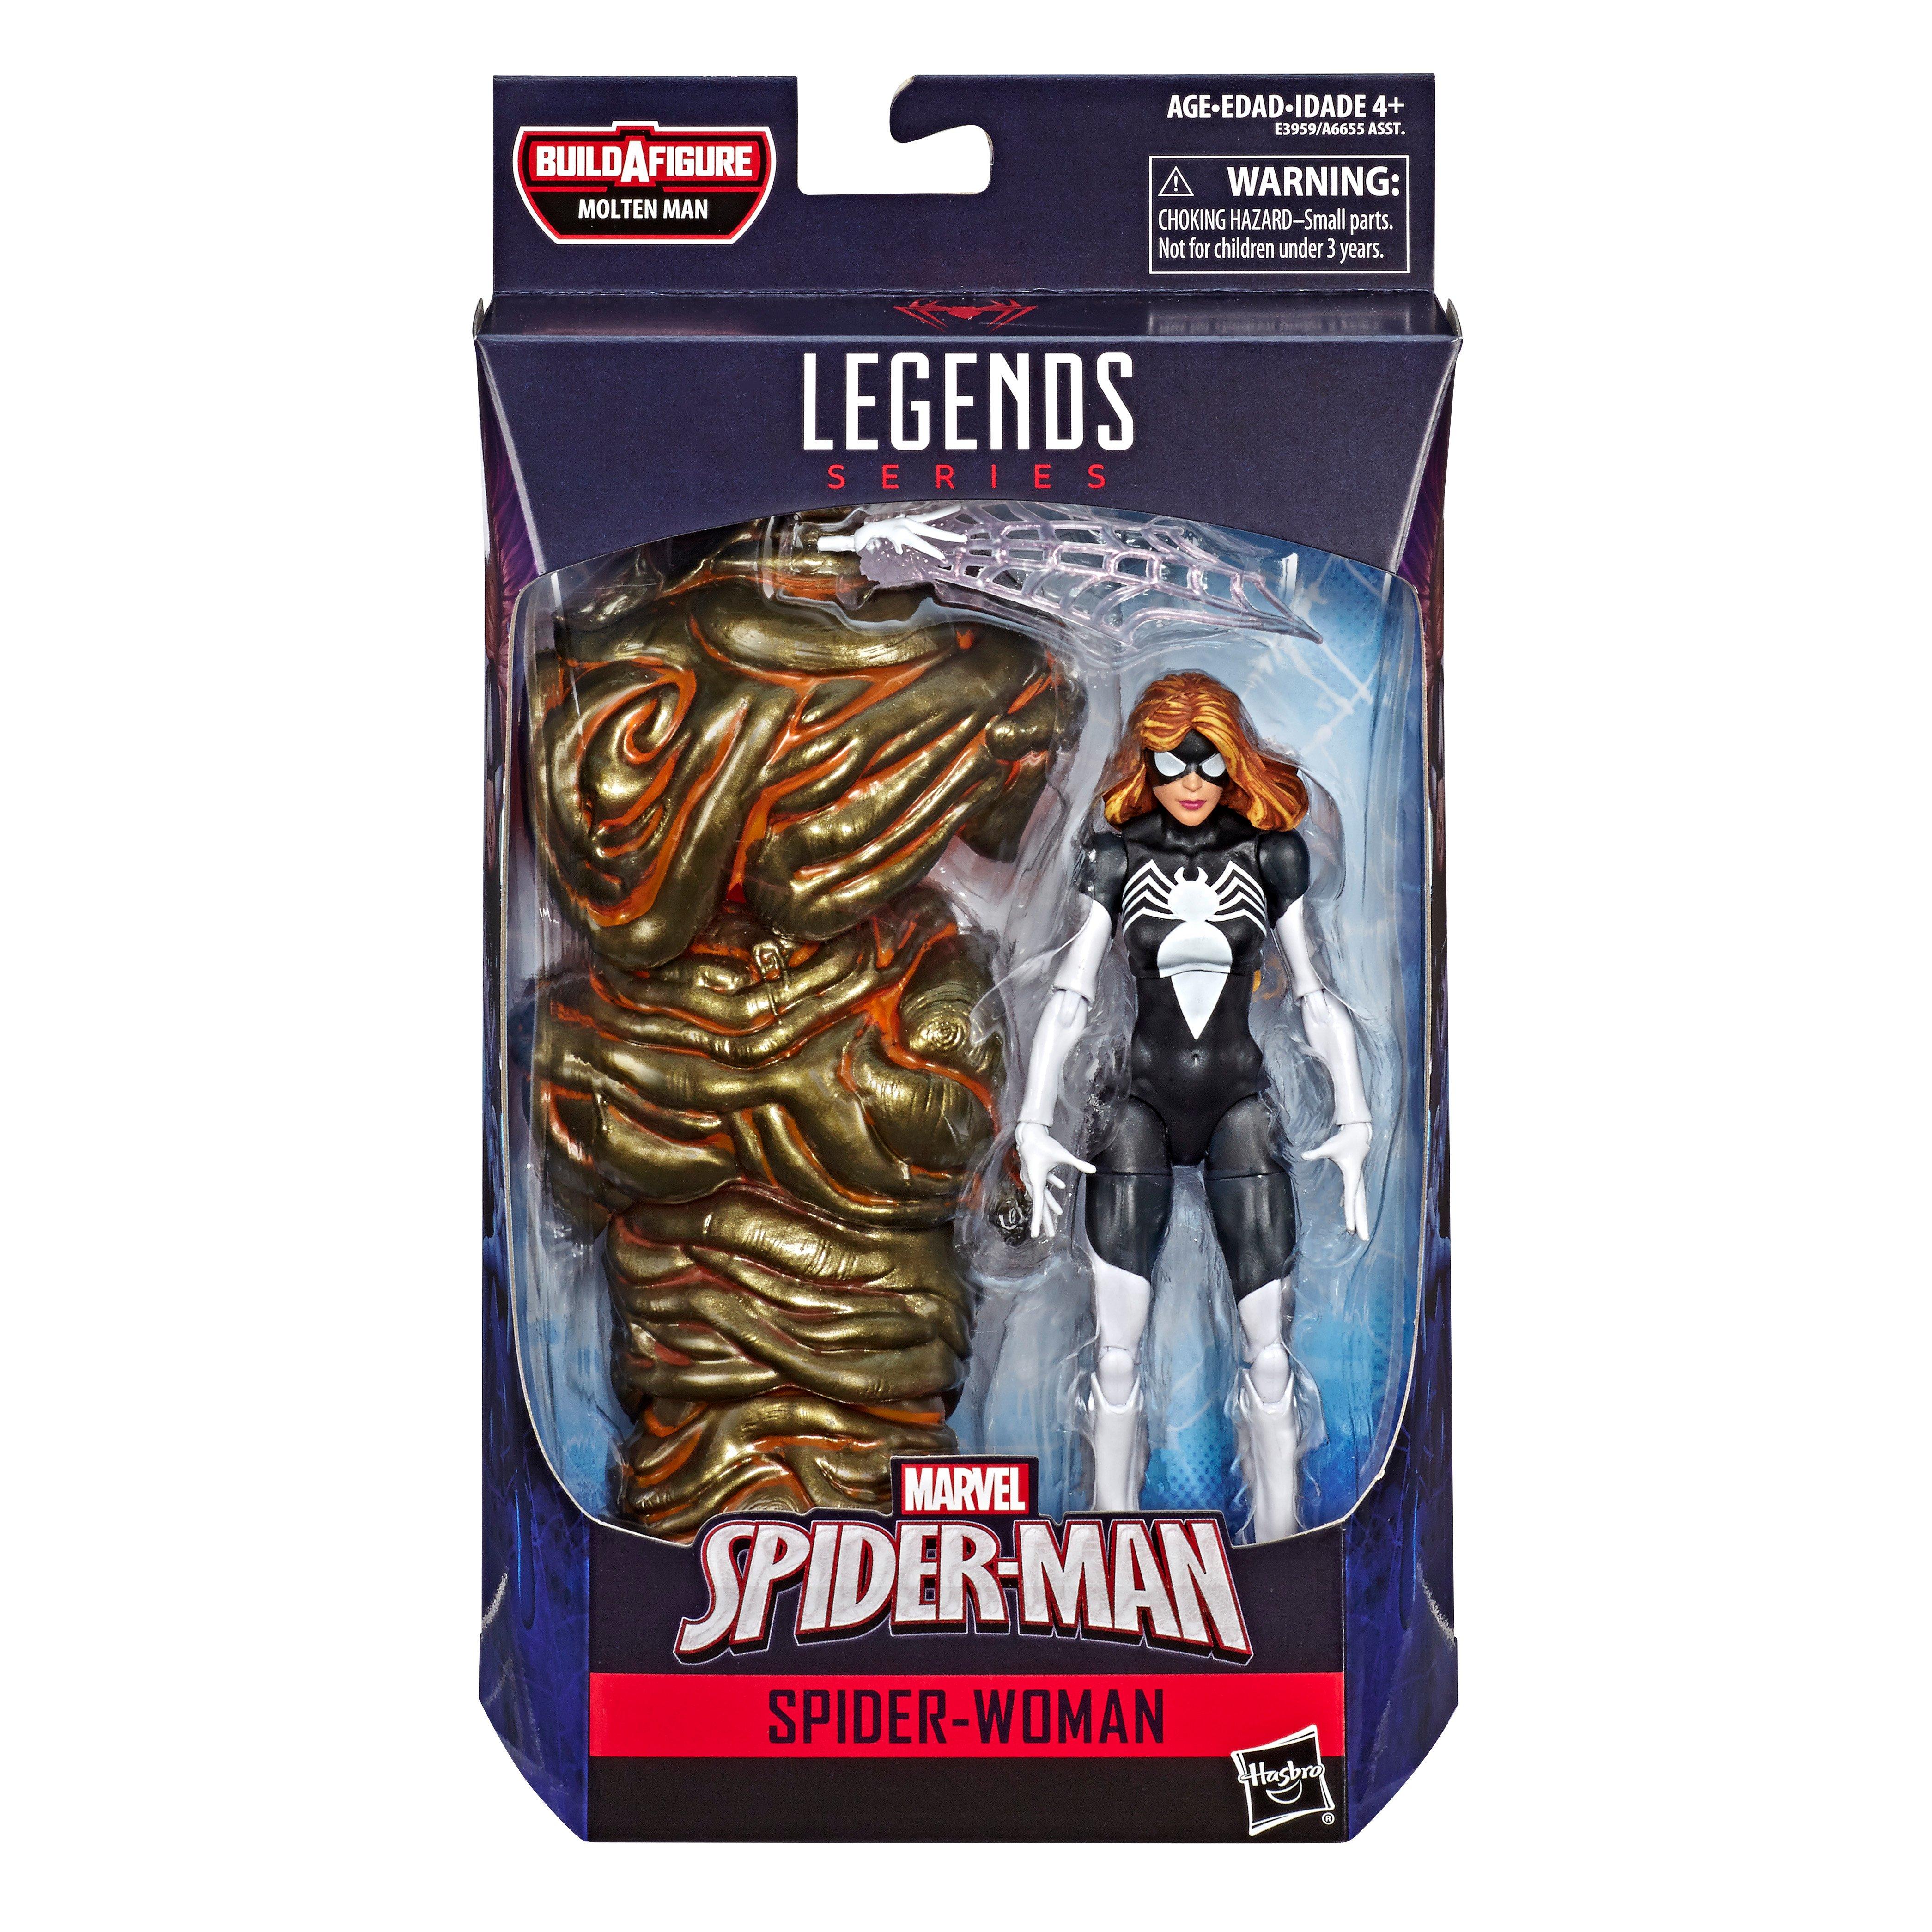 Hasbro Marvel Legends Series Spider-Man: White Spider-Woman 6-in Action Figure